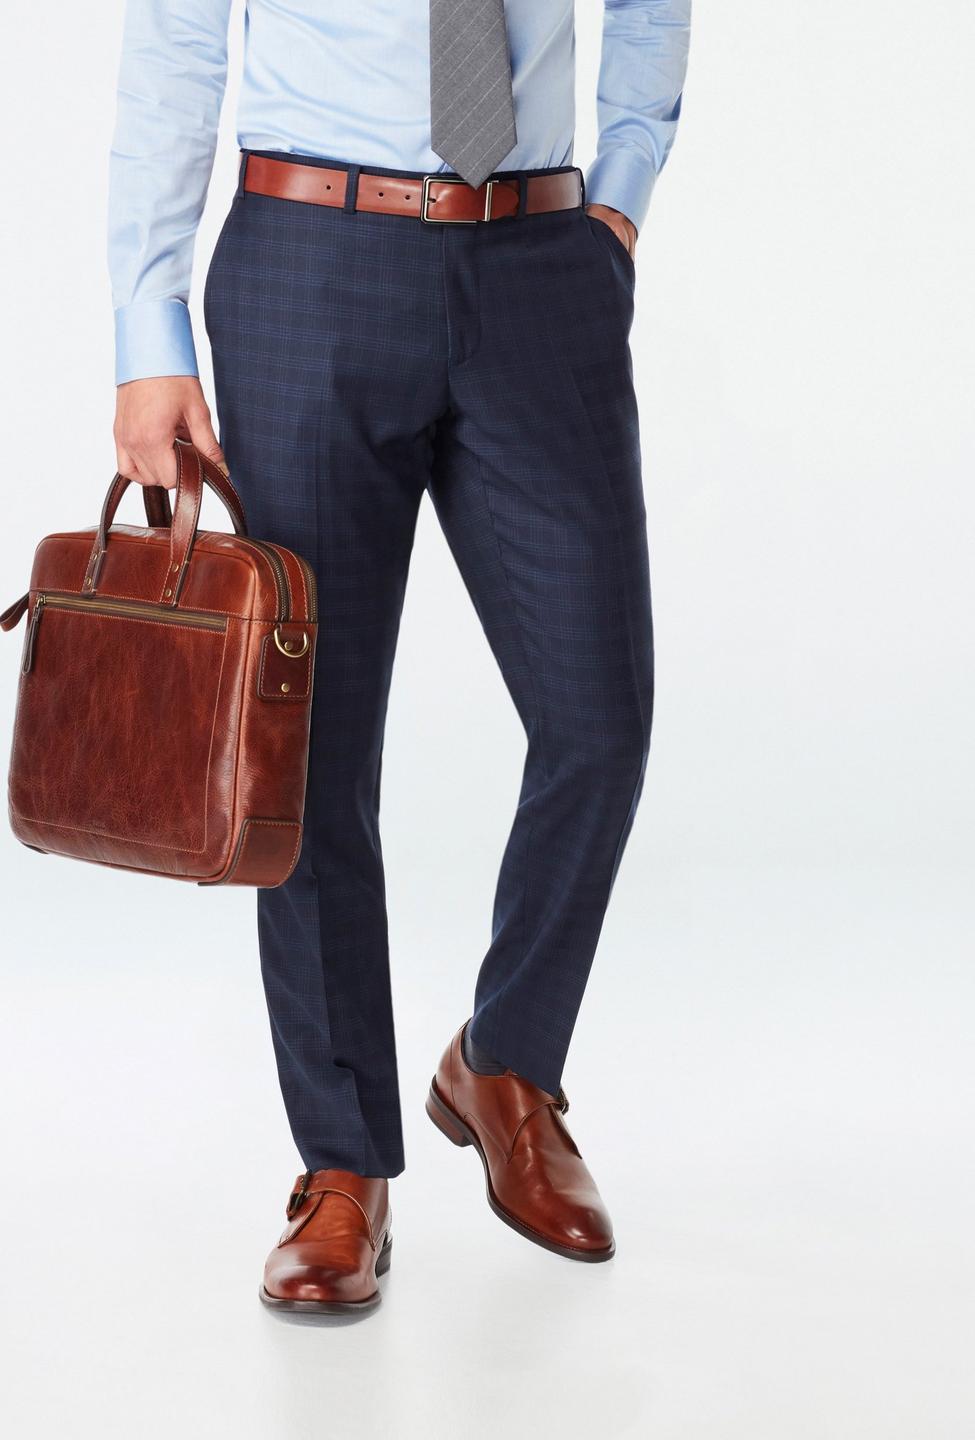 Navy pants - Doncaster Checked Design from Seasonal Indochino Collection